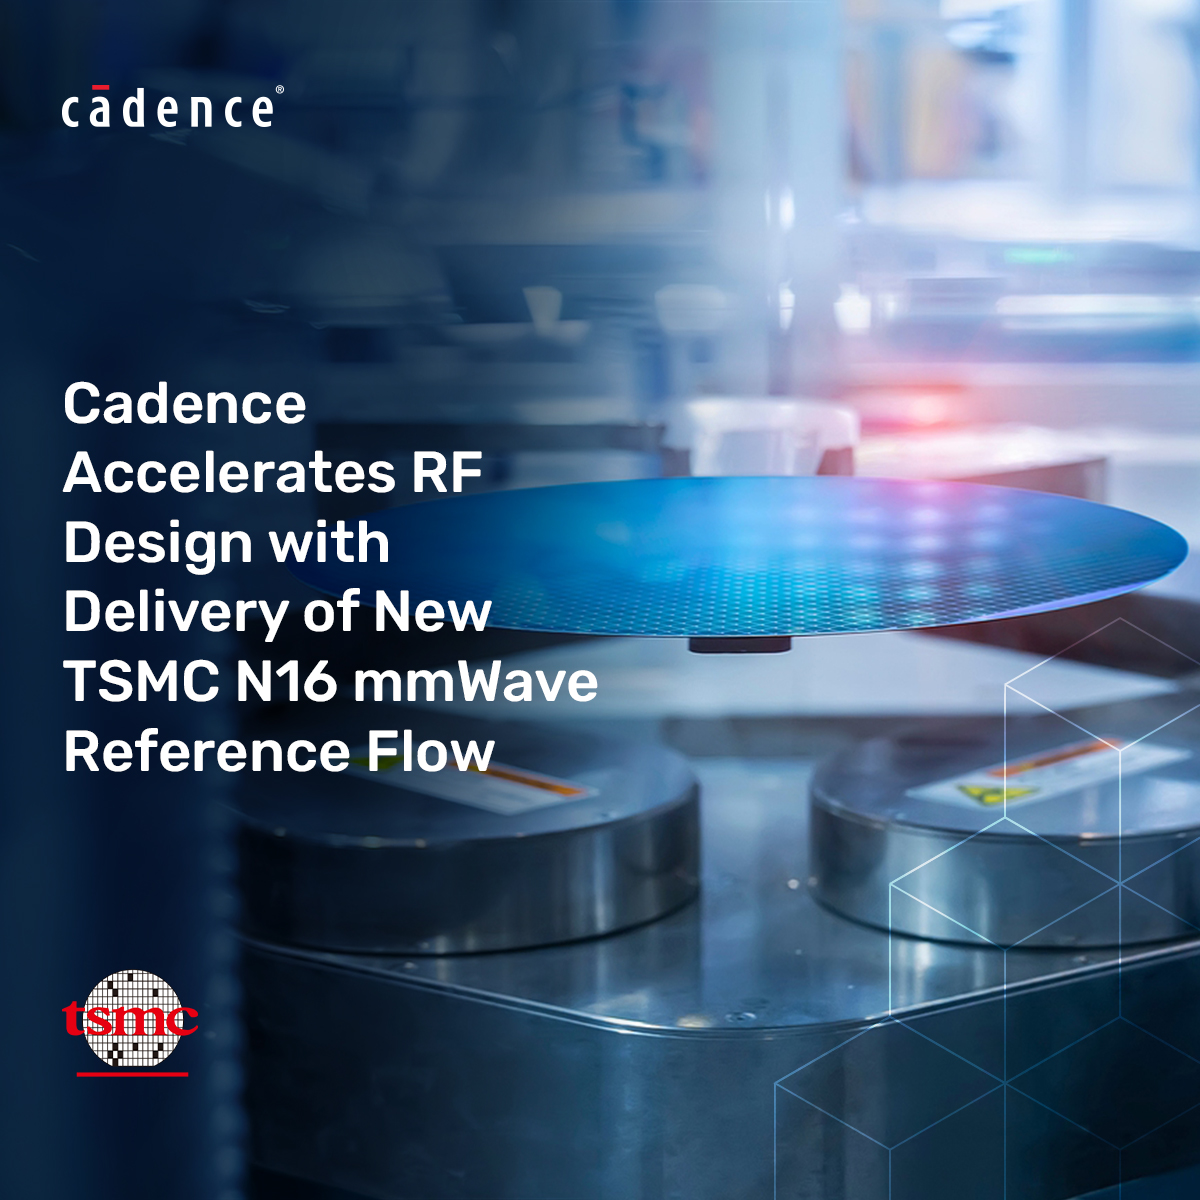 Cadence and TSMC collaborate on N16 mmWave RF design enablement to accelerate innovation in mobile, 5G and automotive applications. Learn more >> bit.ly/3Nc3OLC